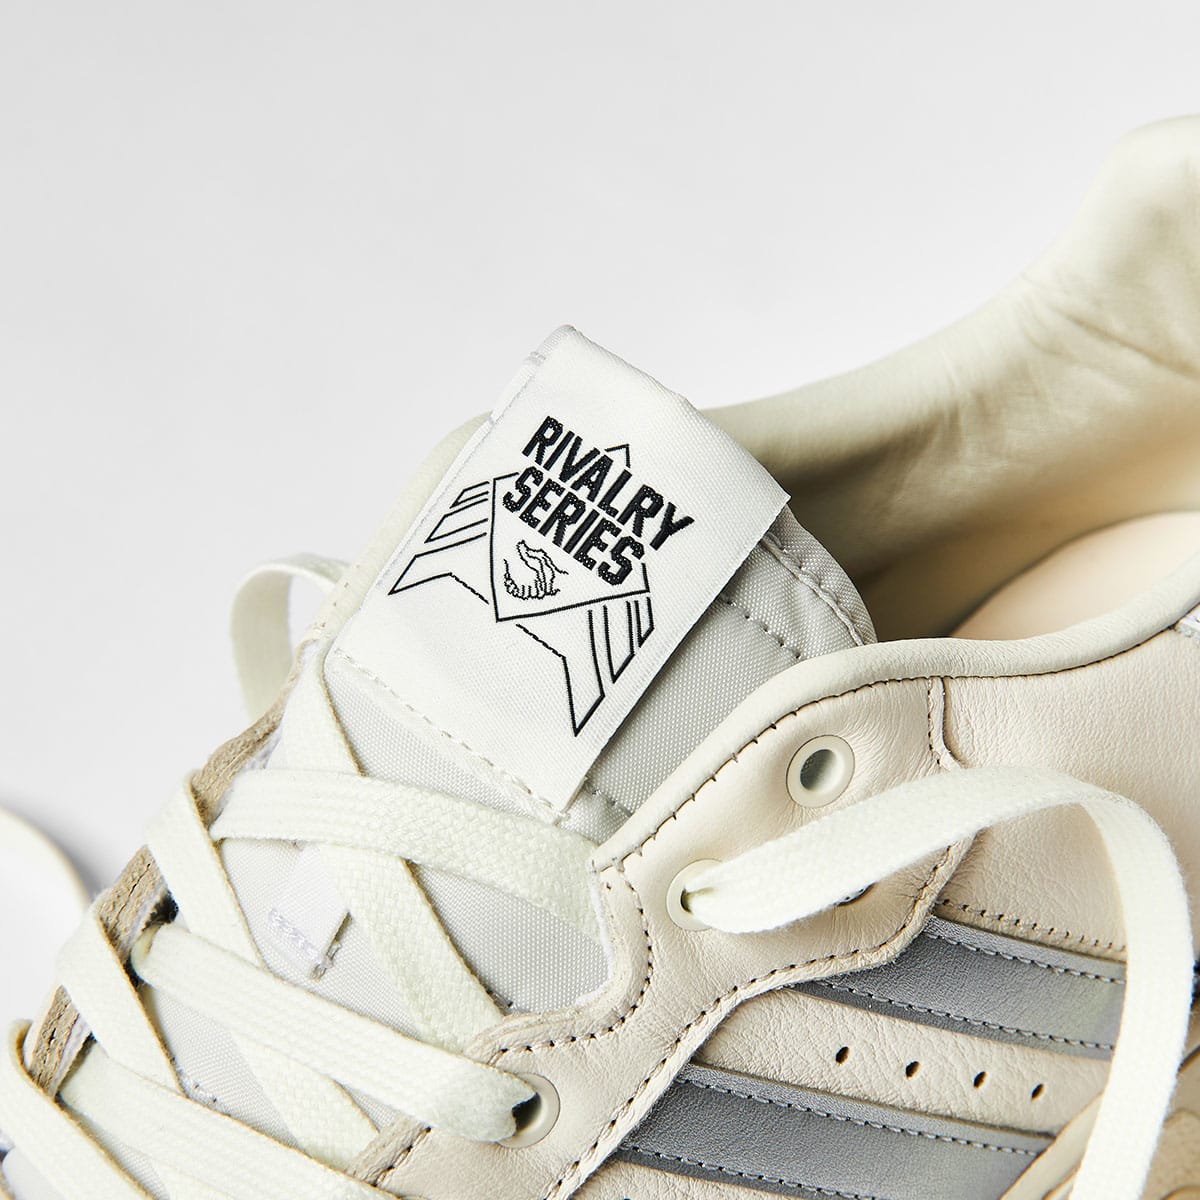 Adidas Rivalry Low Consortium (Chalk White & Silver) | END. Launches